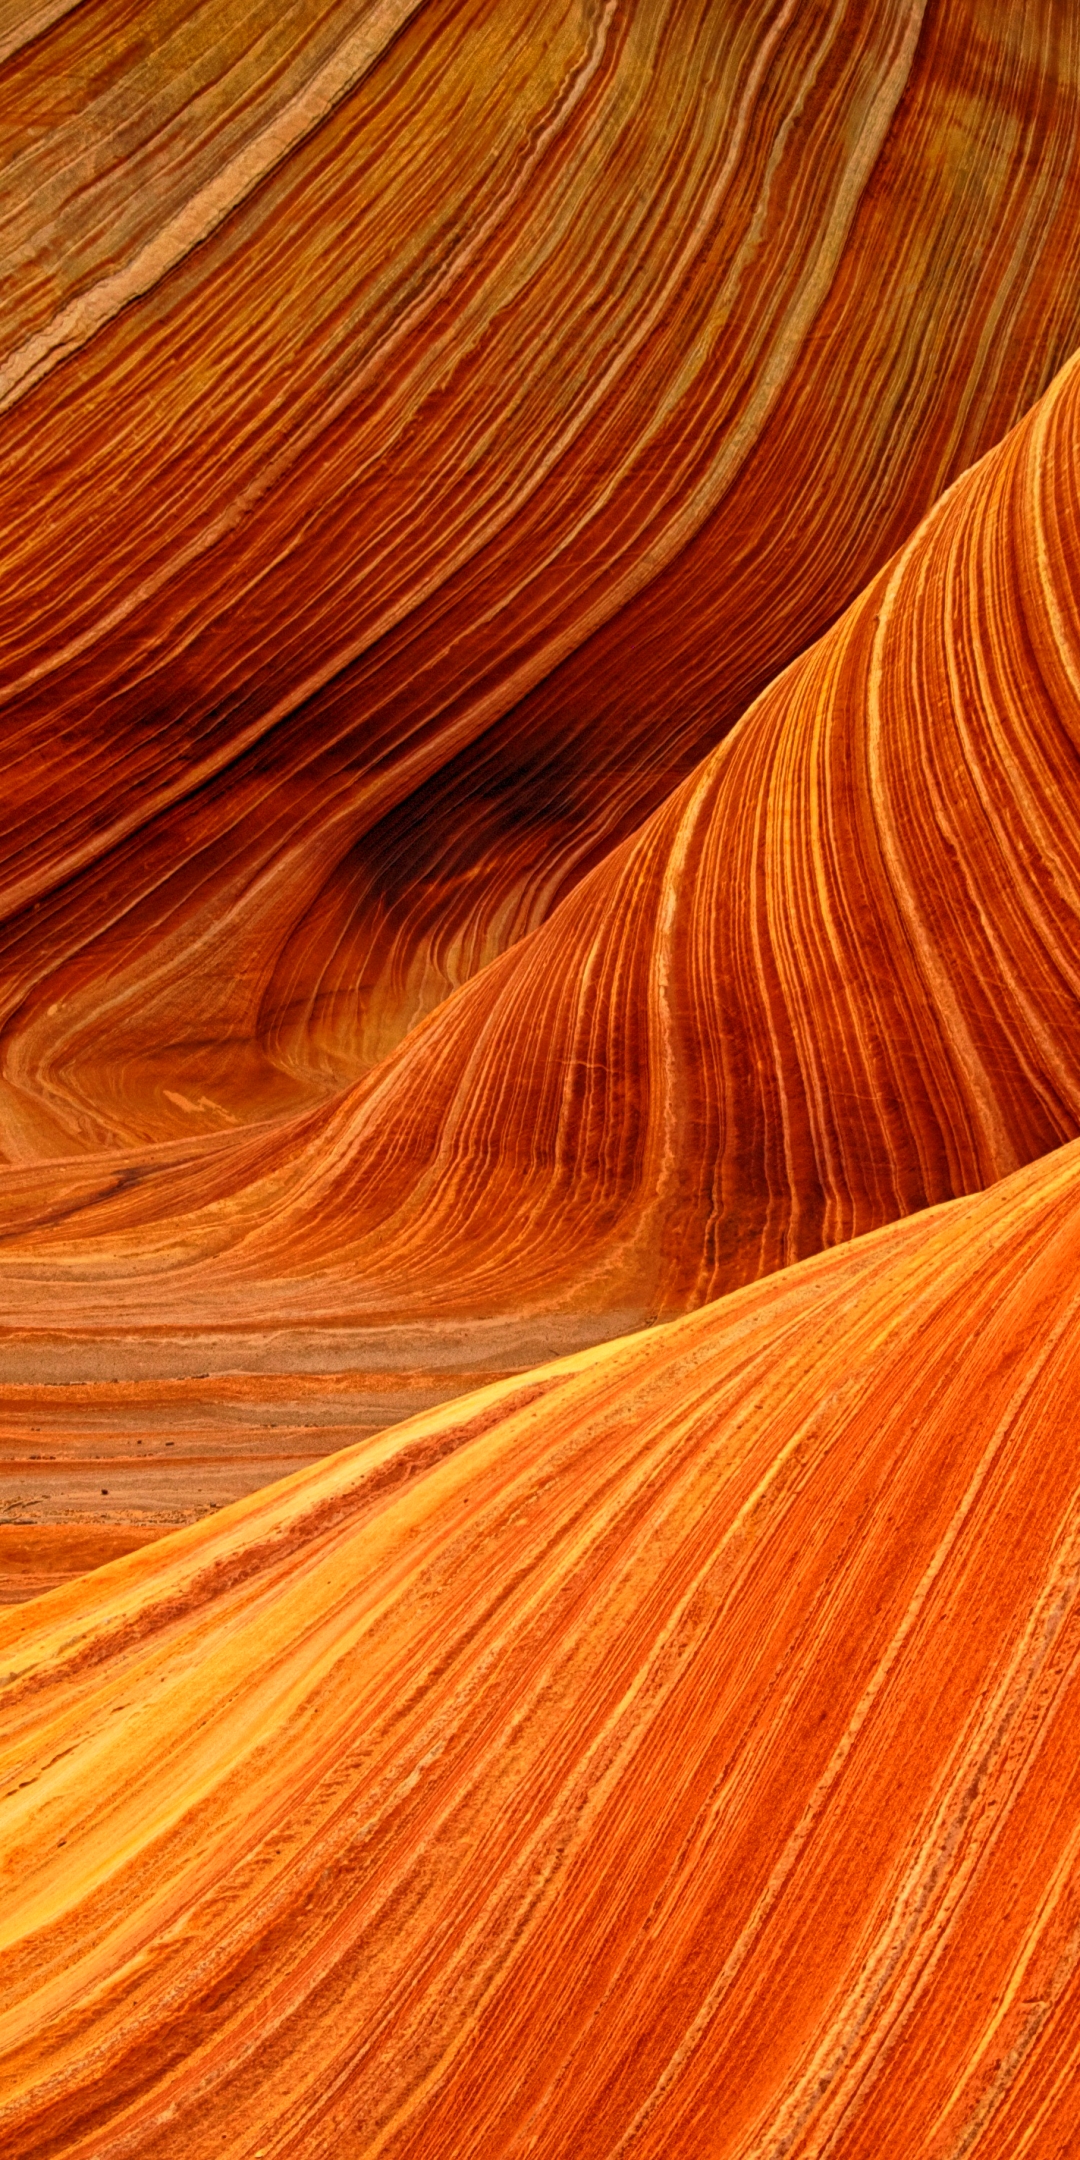 Sandstone Texture of Antelope Canyon